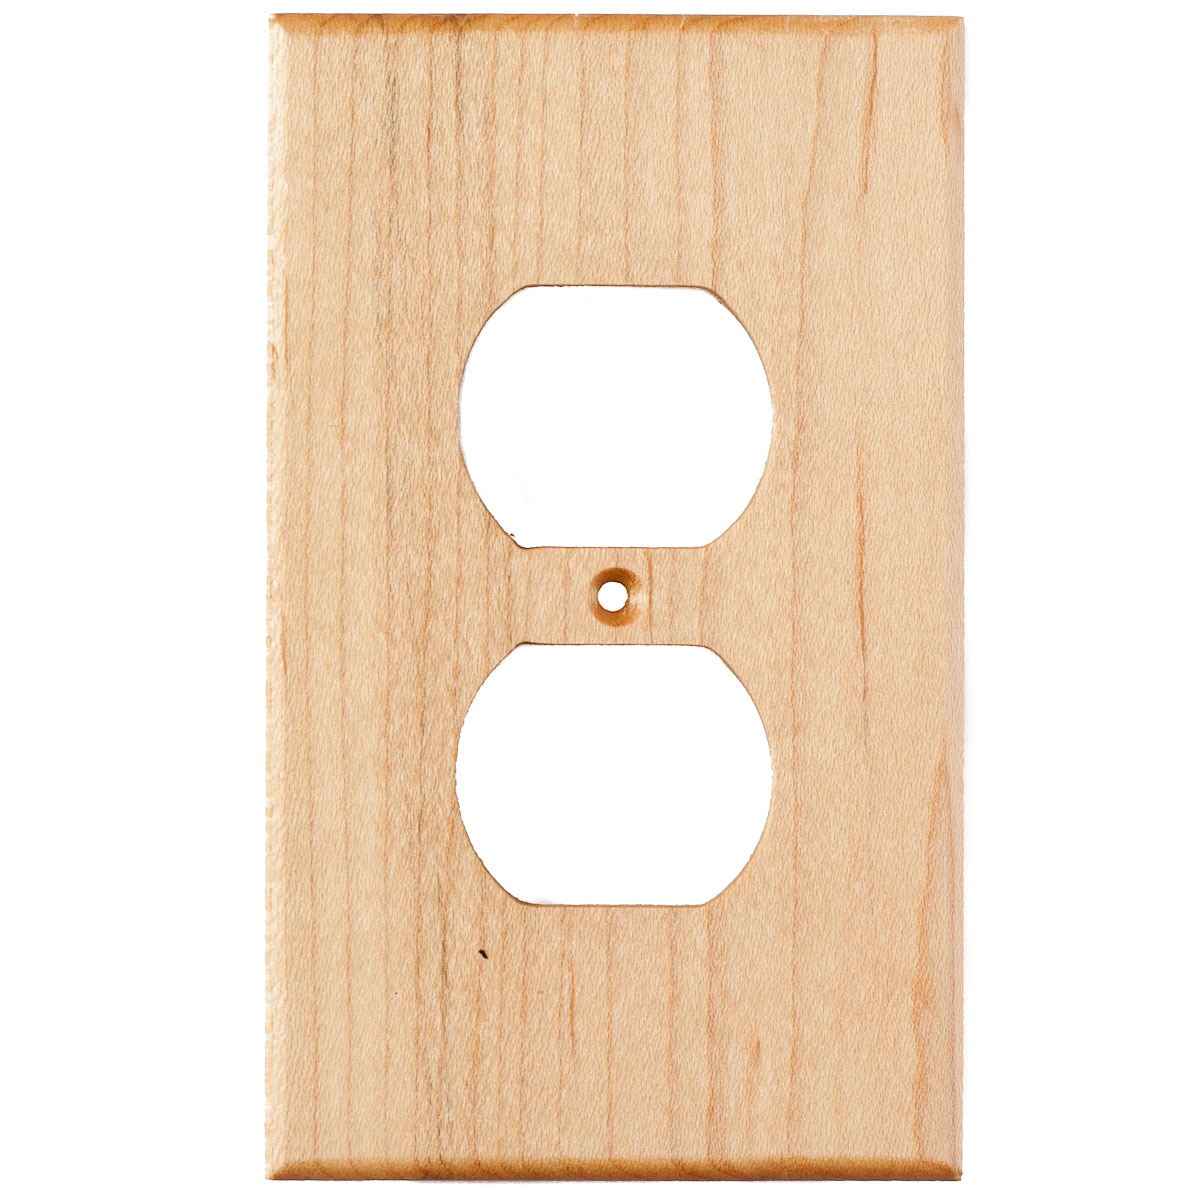 Maple Wood Wall Plate - 1 Gang Duplex Outlet Cover - Virgin Timber